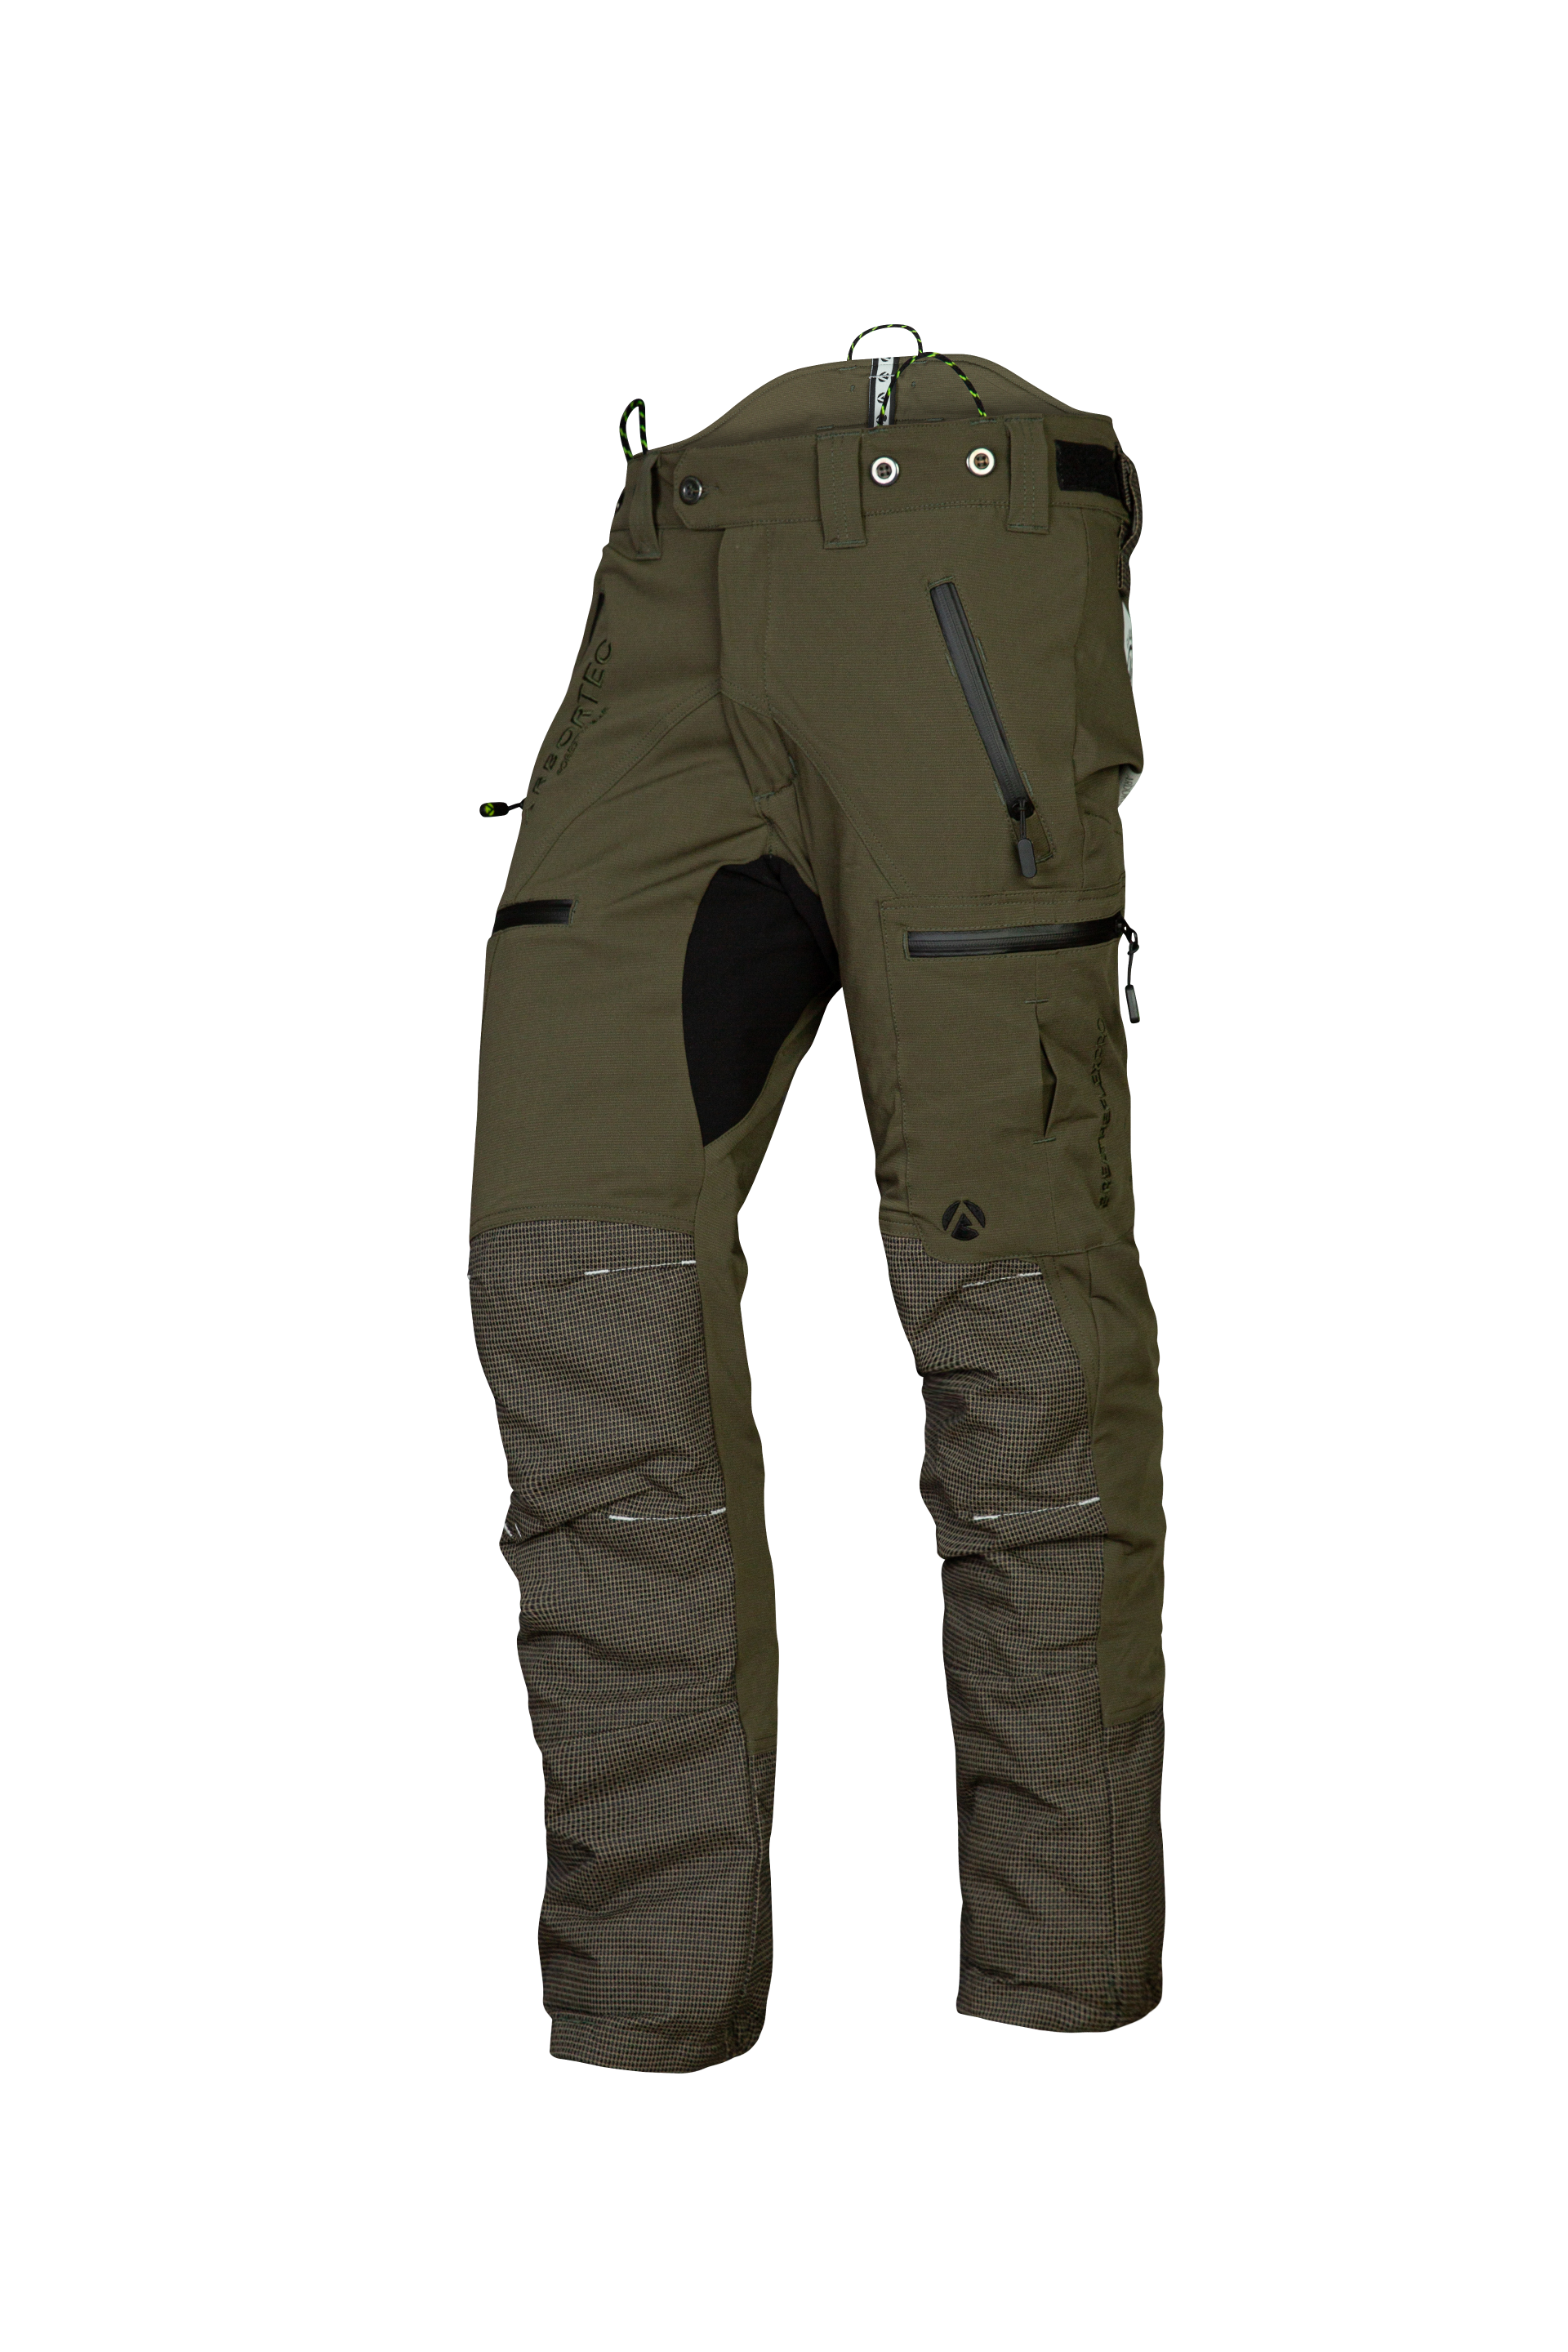 AT4060 Breatheflex Pro Chainsaw Trousers Design A Class 1 - Olive